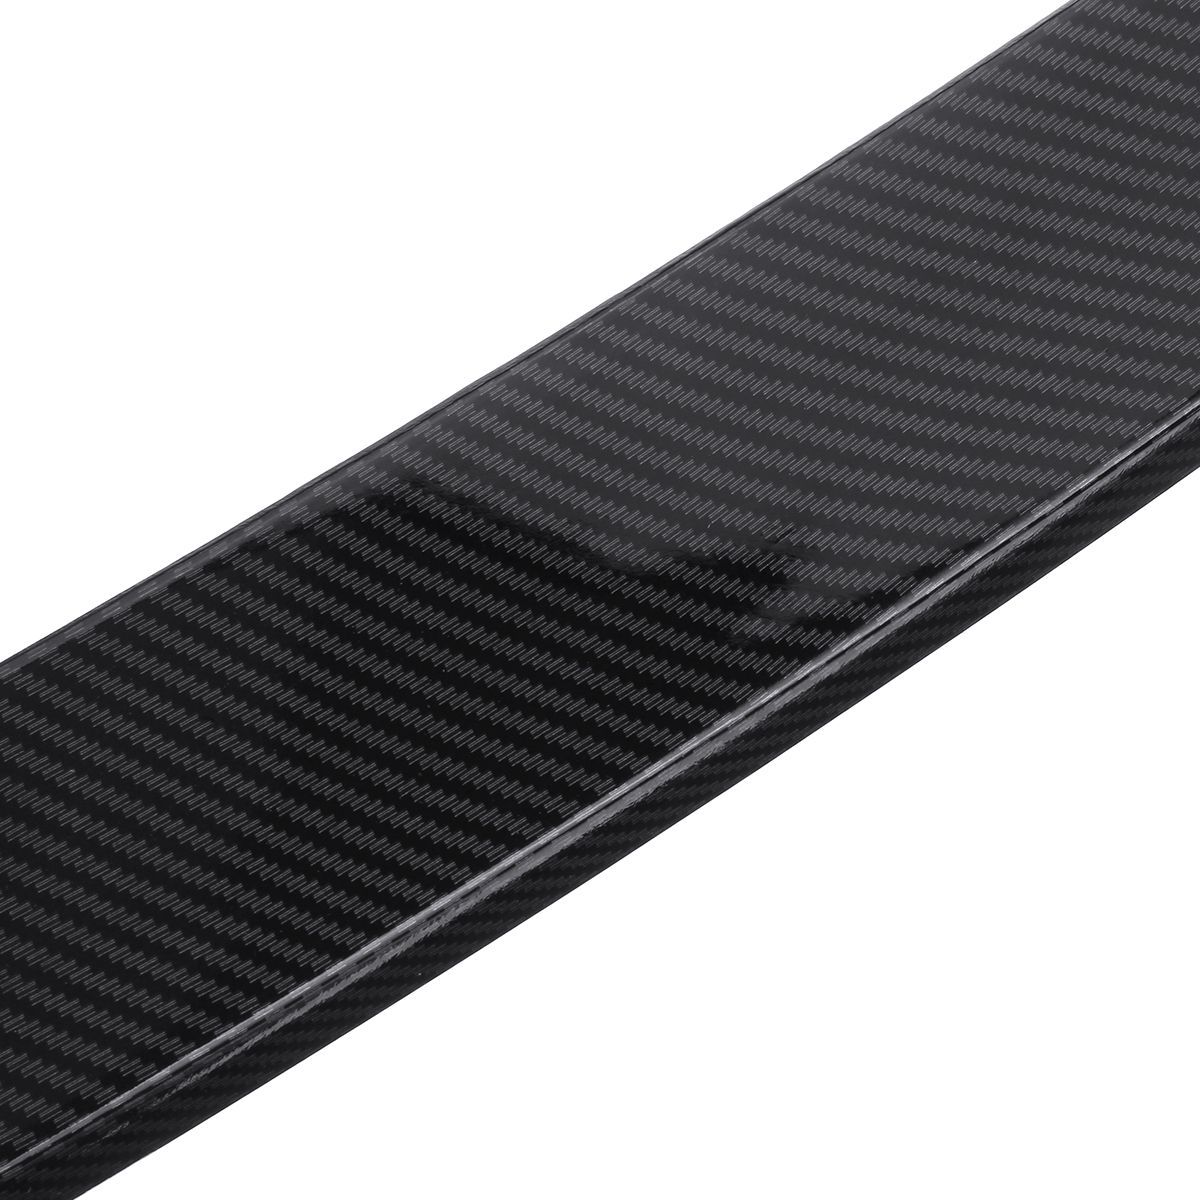 Carbon-Fiber-Style-ABS-OE-Type-Car-Trunk-Spoiler-Wing-For-BMW-E90-3-series-Sedan-2005-2011-1561511